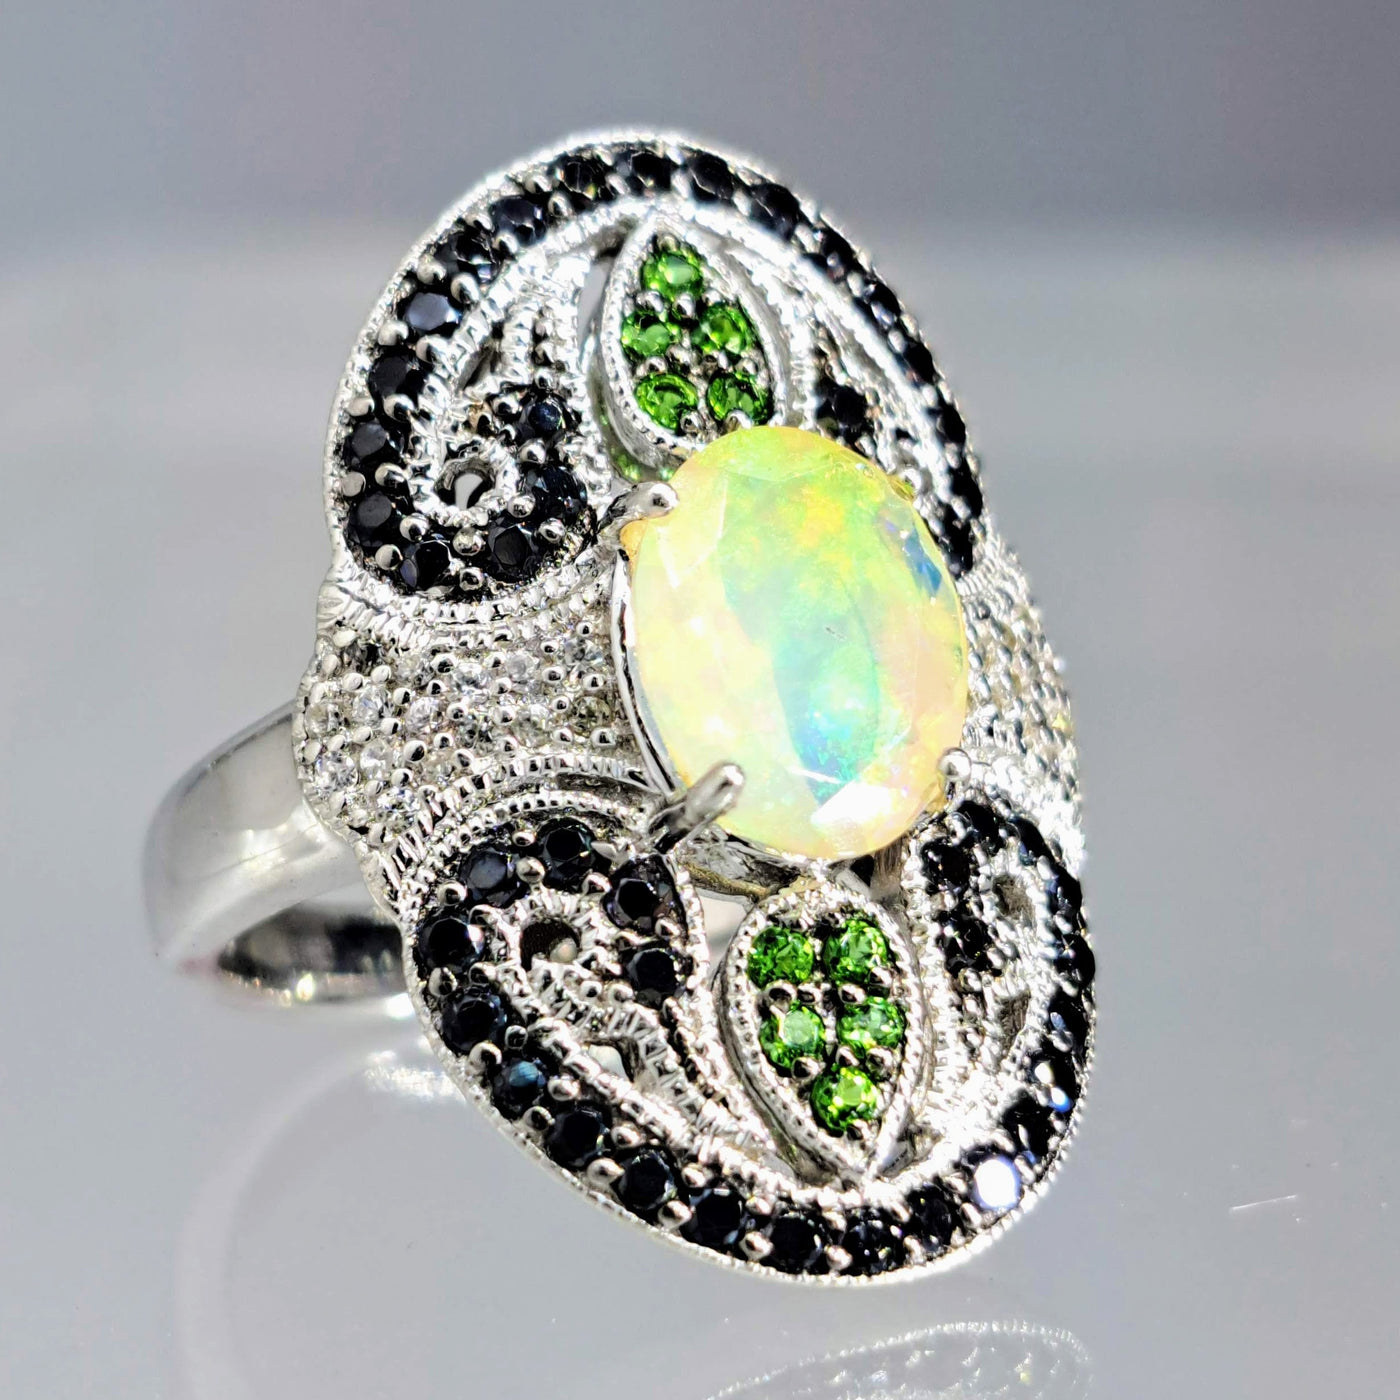 "Aunt Opal's Art Deco Revival" Sz 8 Ring - Opal, Sapphire, Chrome Diopside, Anti-tarnish Sterling